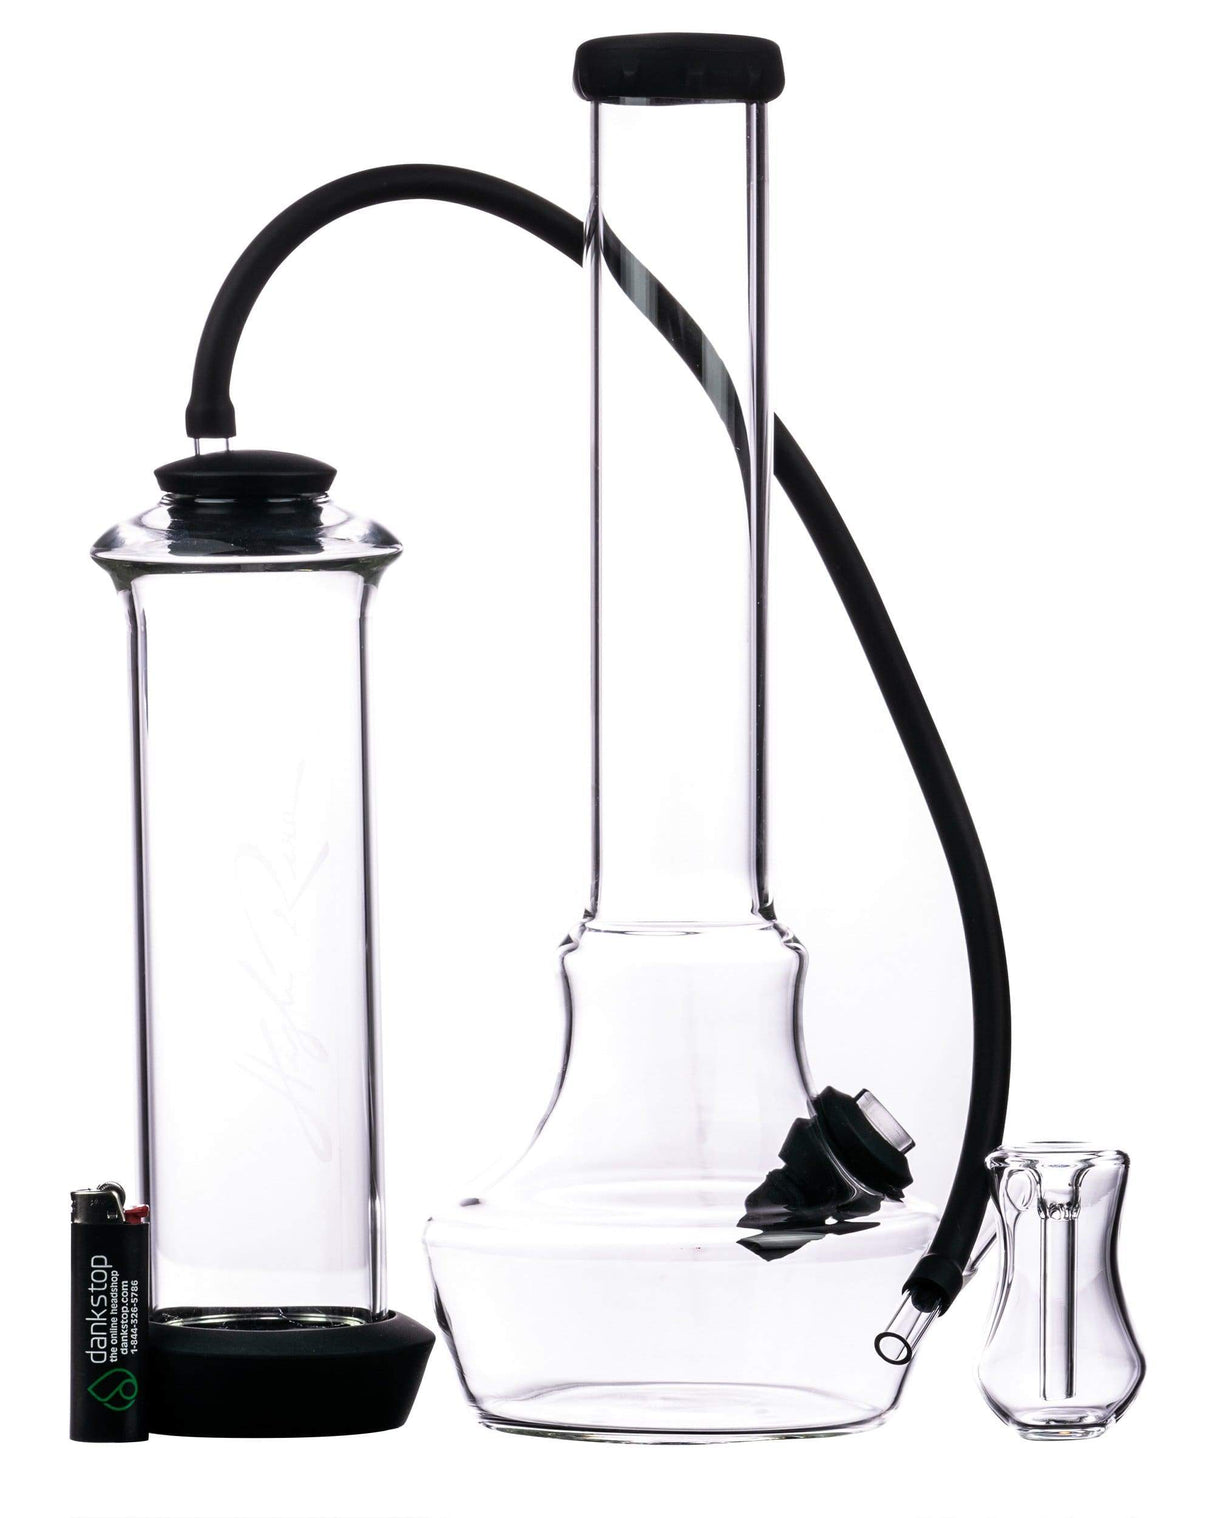 The High Rise Gravity Bong by HighRise, clear borosilicate glass with silicone accents, side view